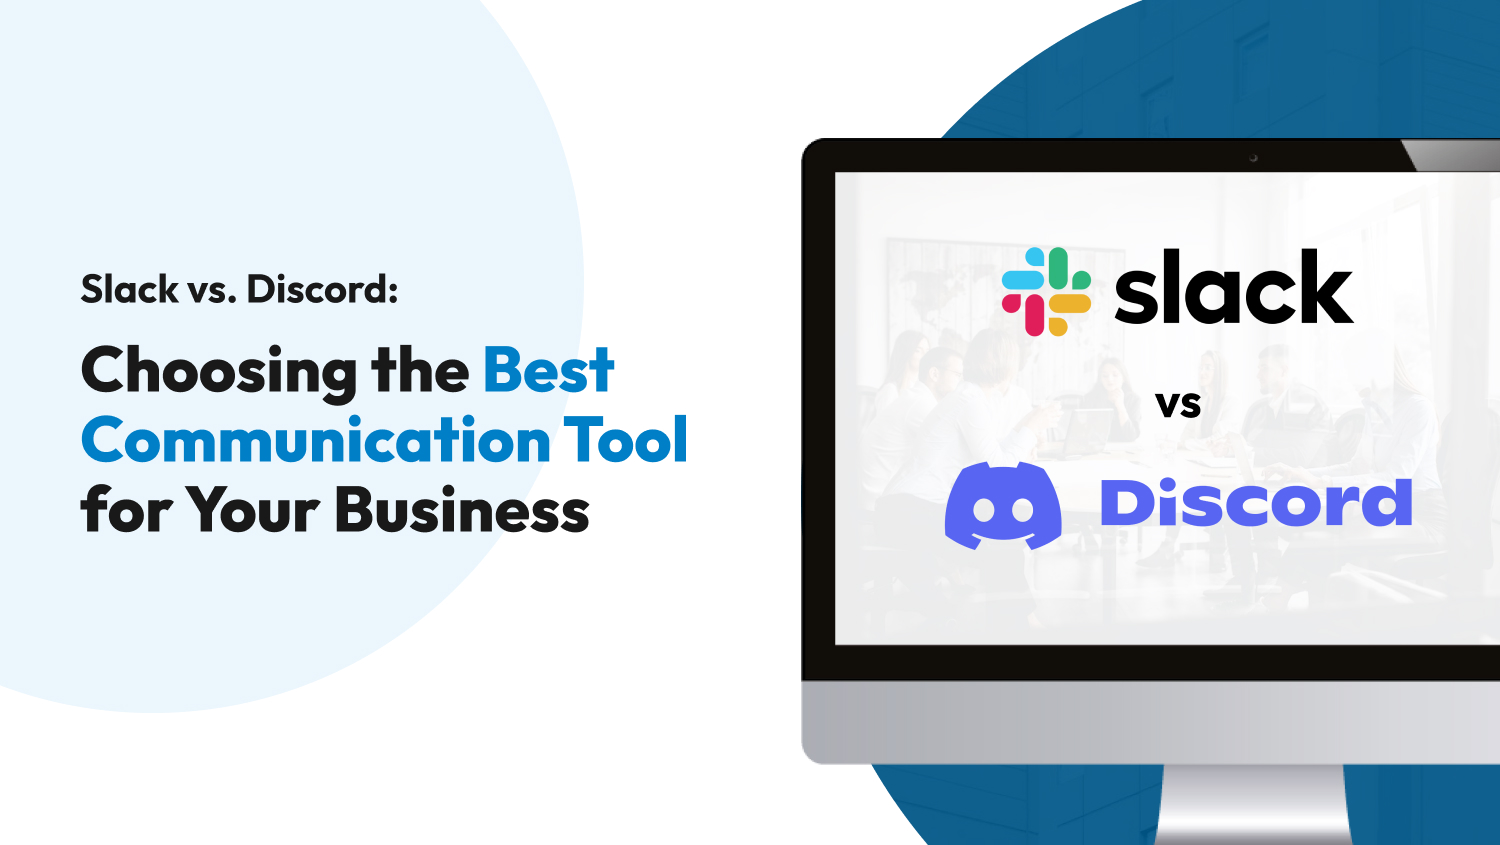 Slack vs. Discord: Choosing the Best Communication Tool for Your Business